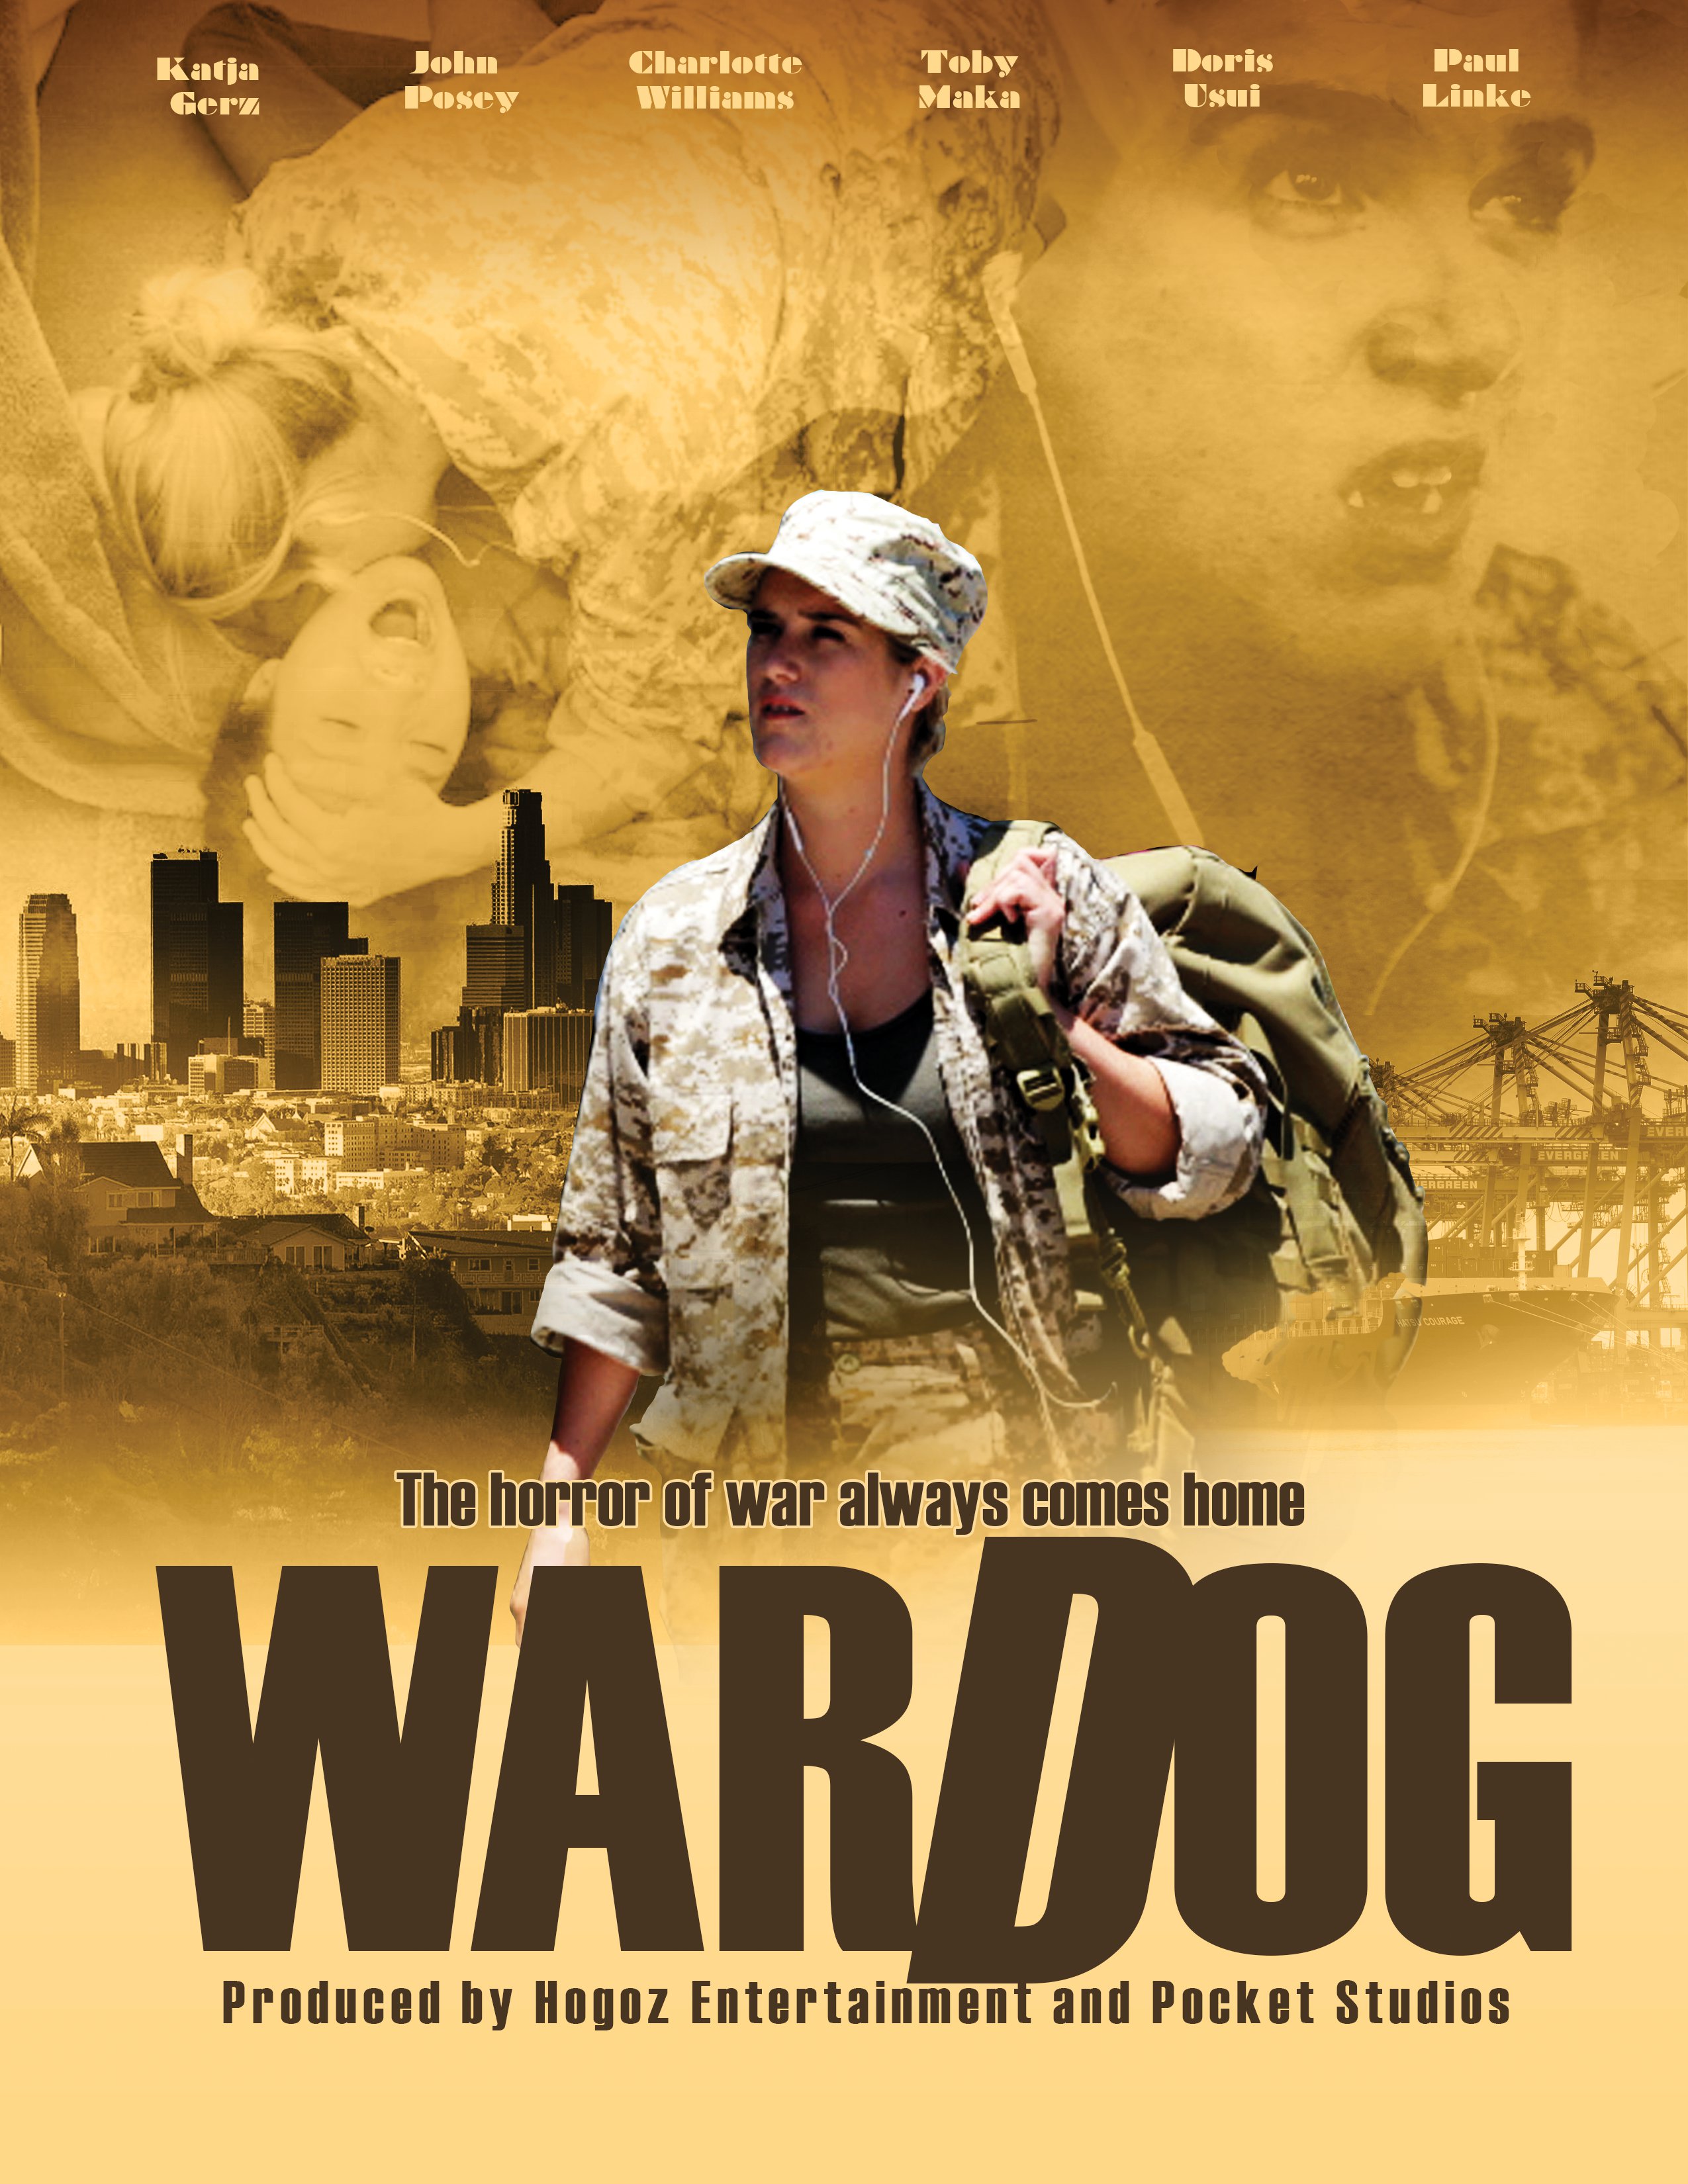 Key art for the film War Dog showing a young female soldier returning home.